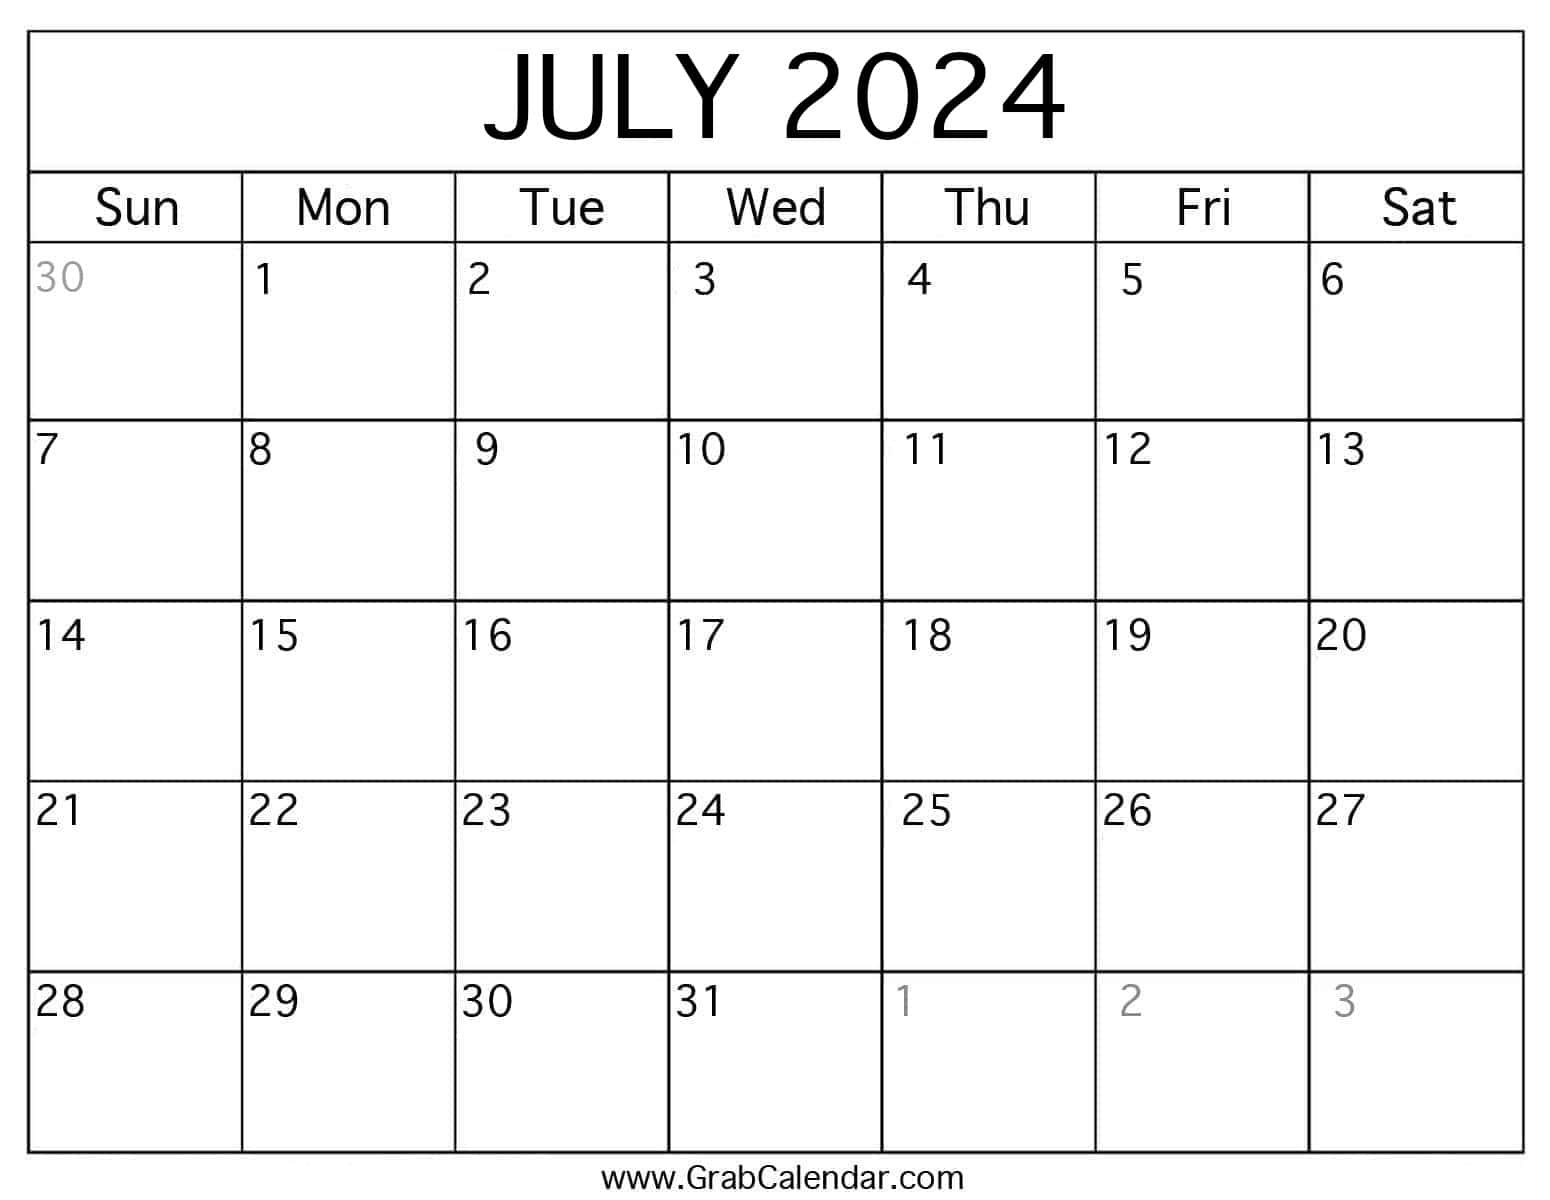 Printable July 2024 Calendar intended for Picture of July Calendar 2024